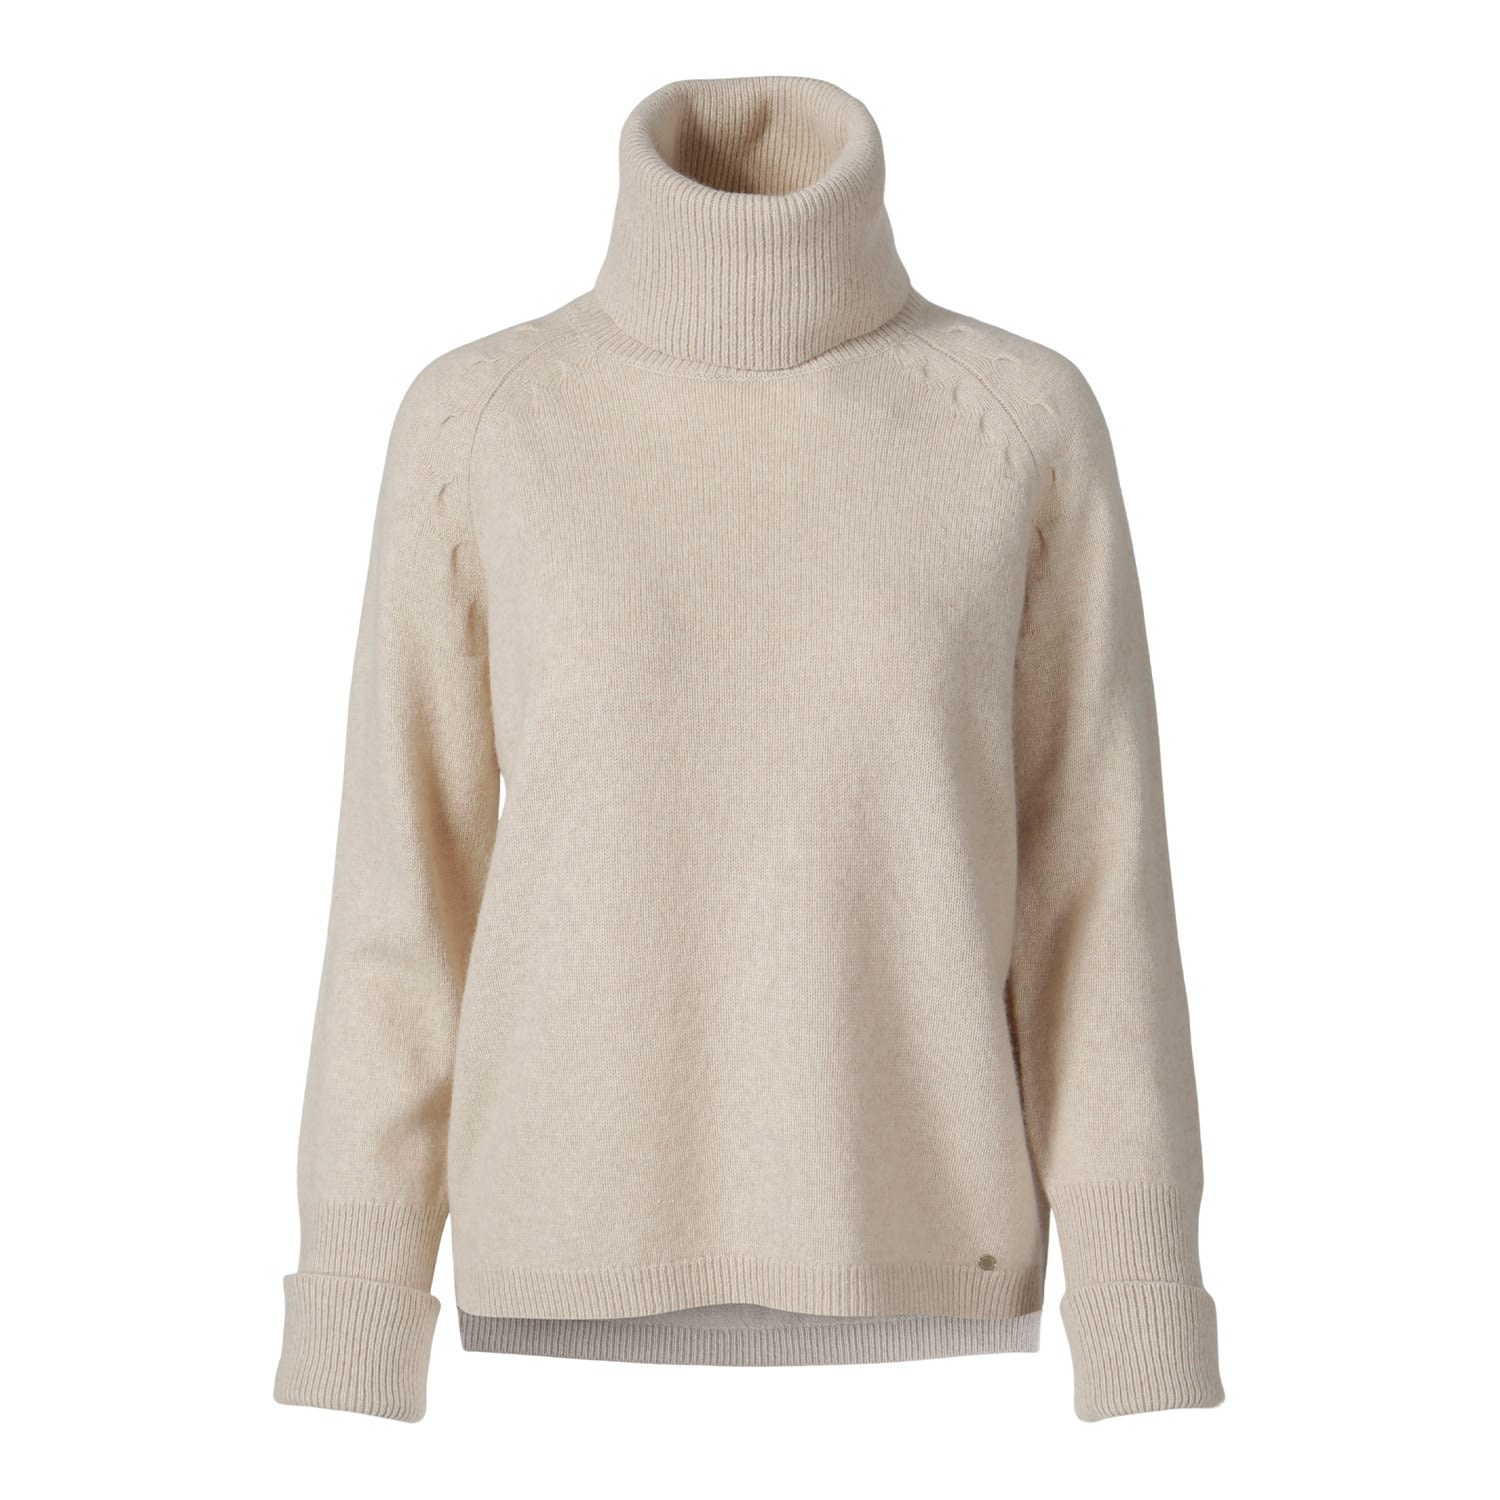 Women’s Neutrals "Cosy" Chunky Turtle Neck Pullover- Beige Melange Extra Large Tirillm